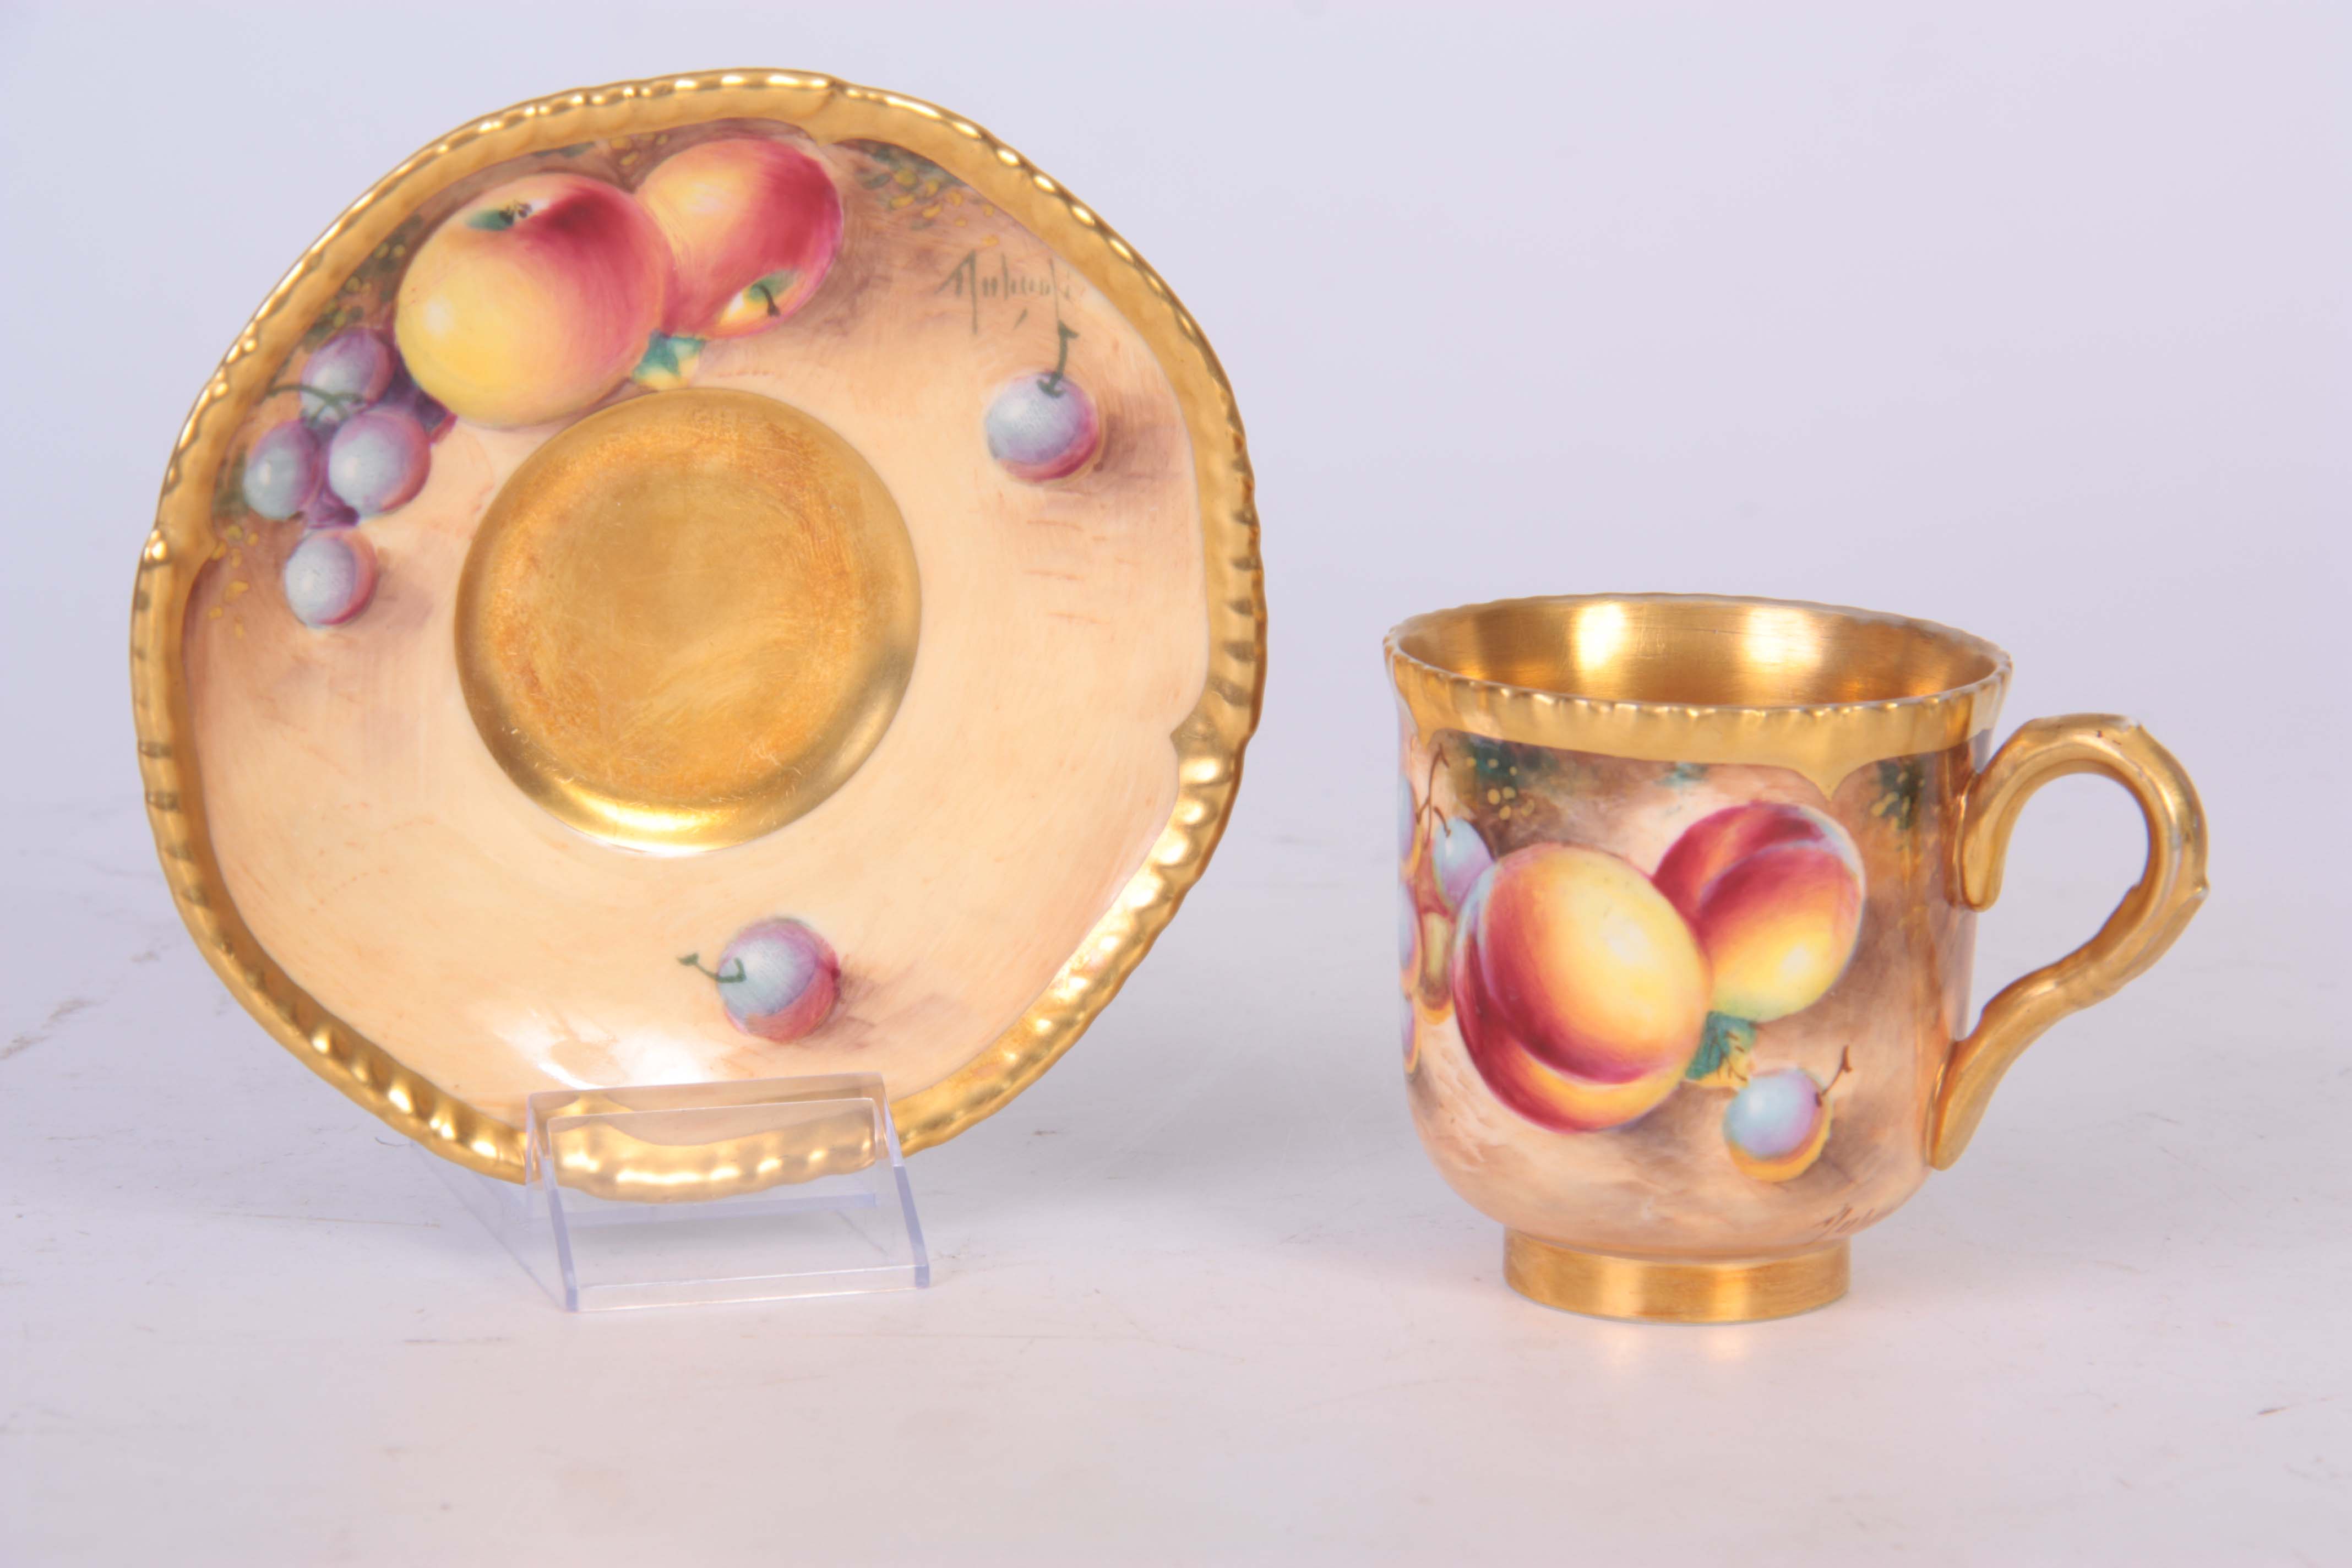 ROBERTS A ROYAL WORCESTER BLACK MARK CABINET CUP AND SAUCER richly gilt and painted with designs - Image 4 of 7